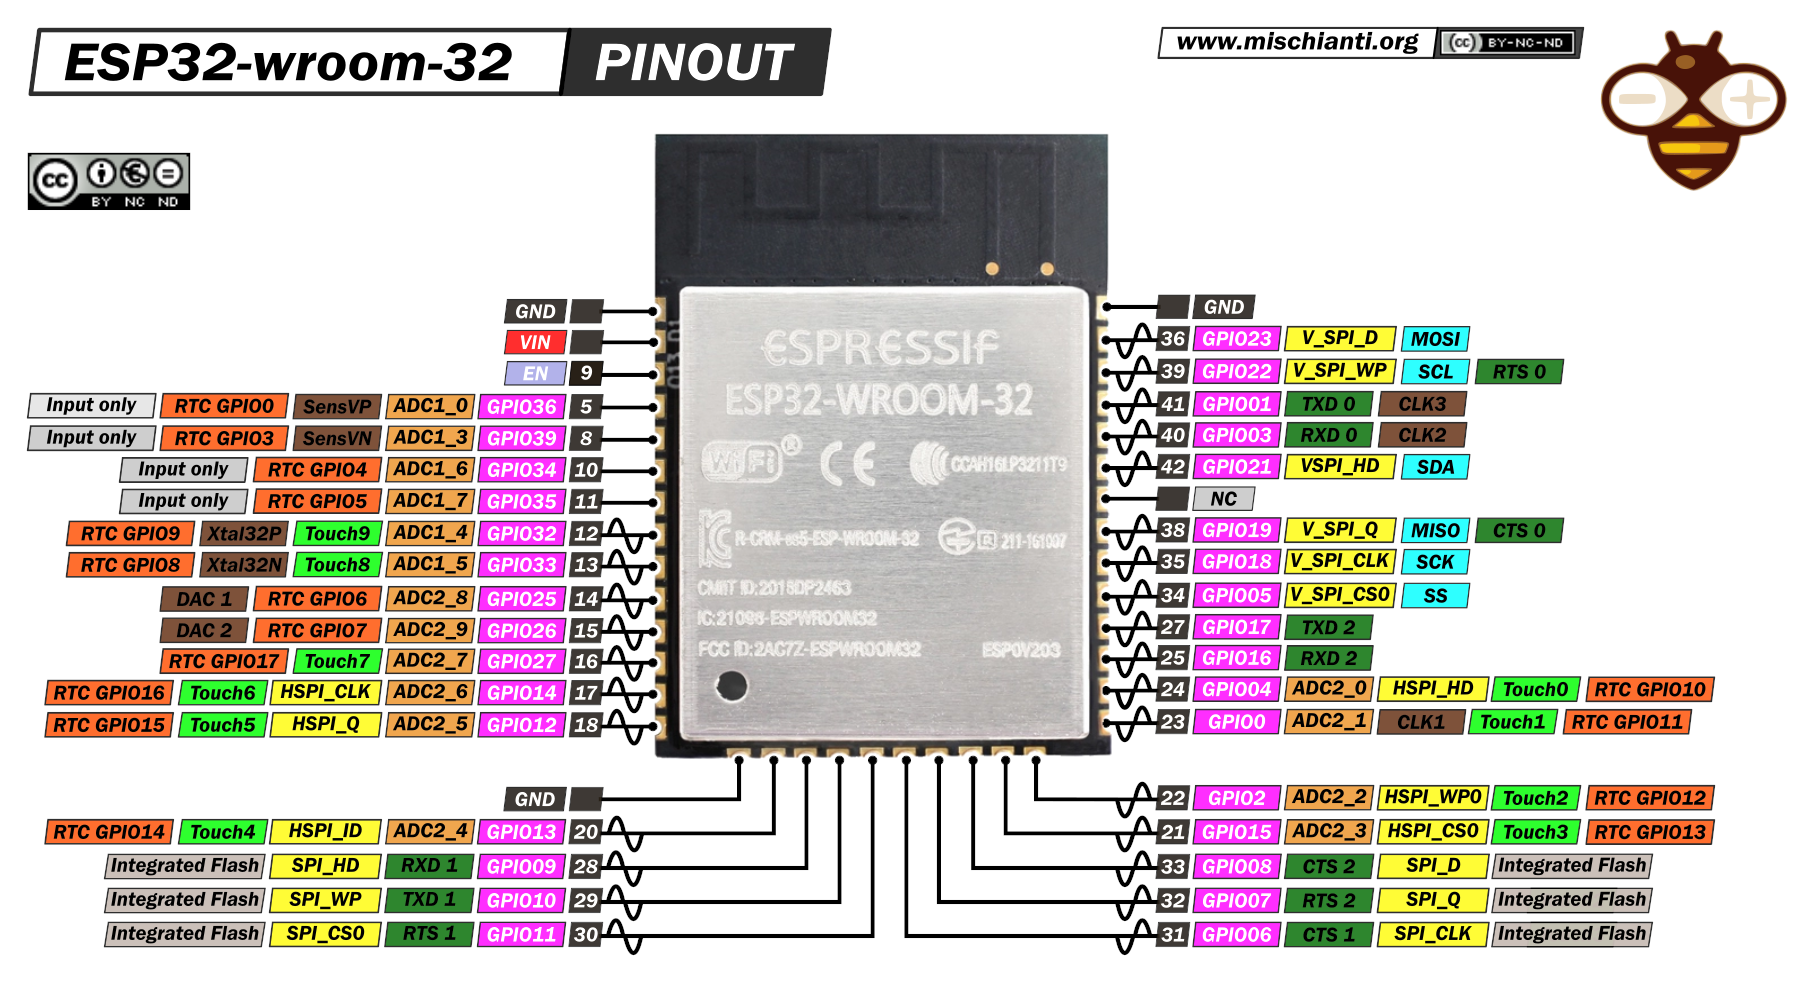 esp32-wroom-32-high-resolution-pinout-and-specs-renzo-mischianti-all